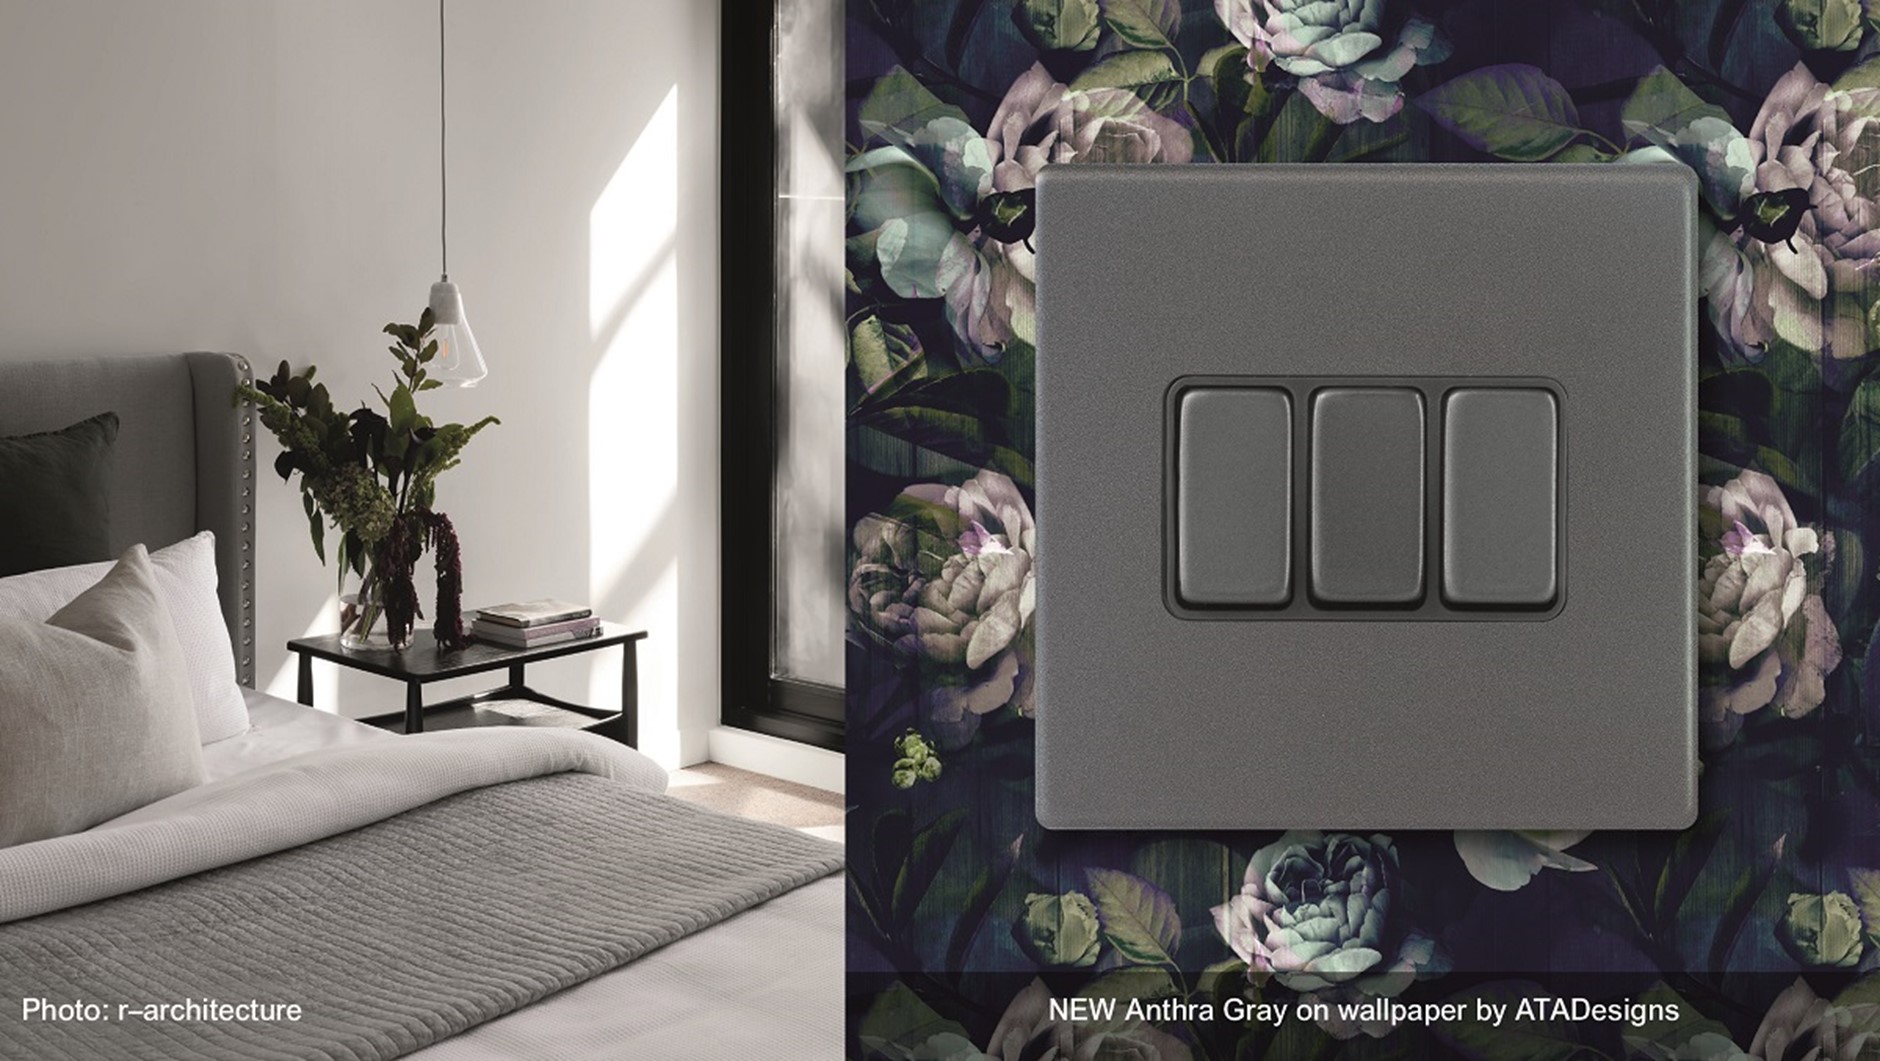 Hamilton introduces new 'Gray' finishes to an interior scheme